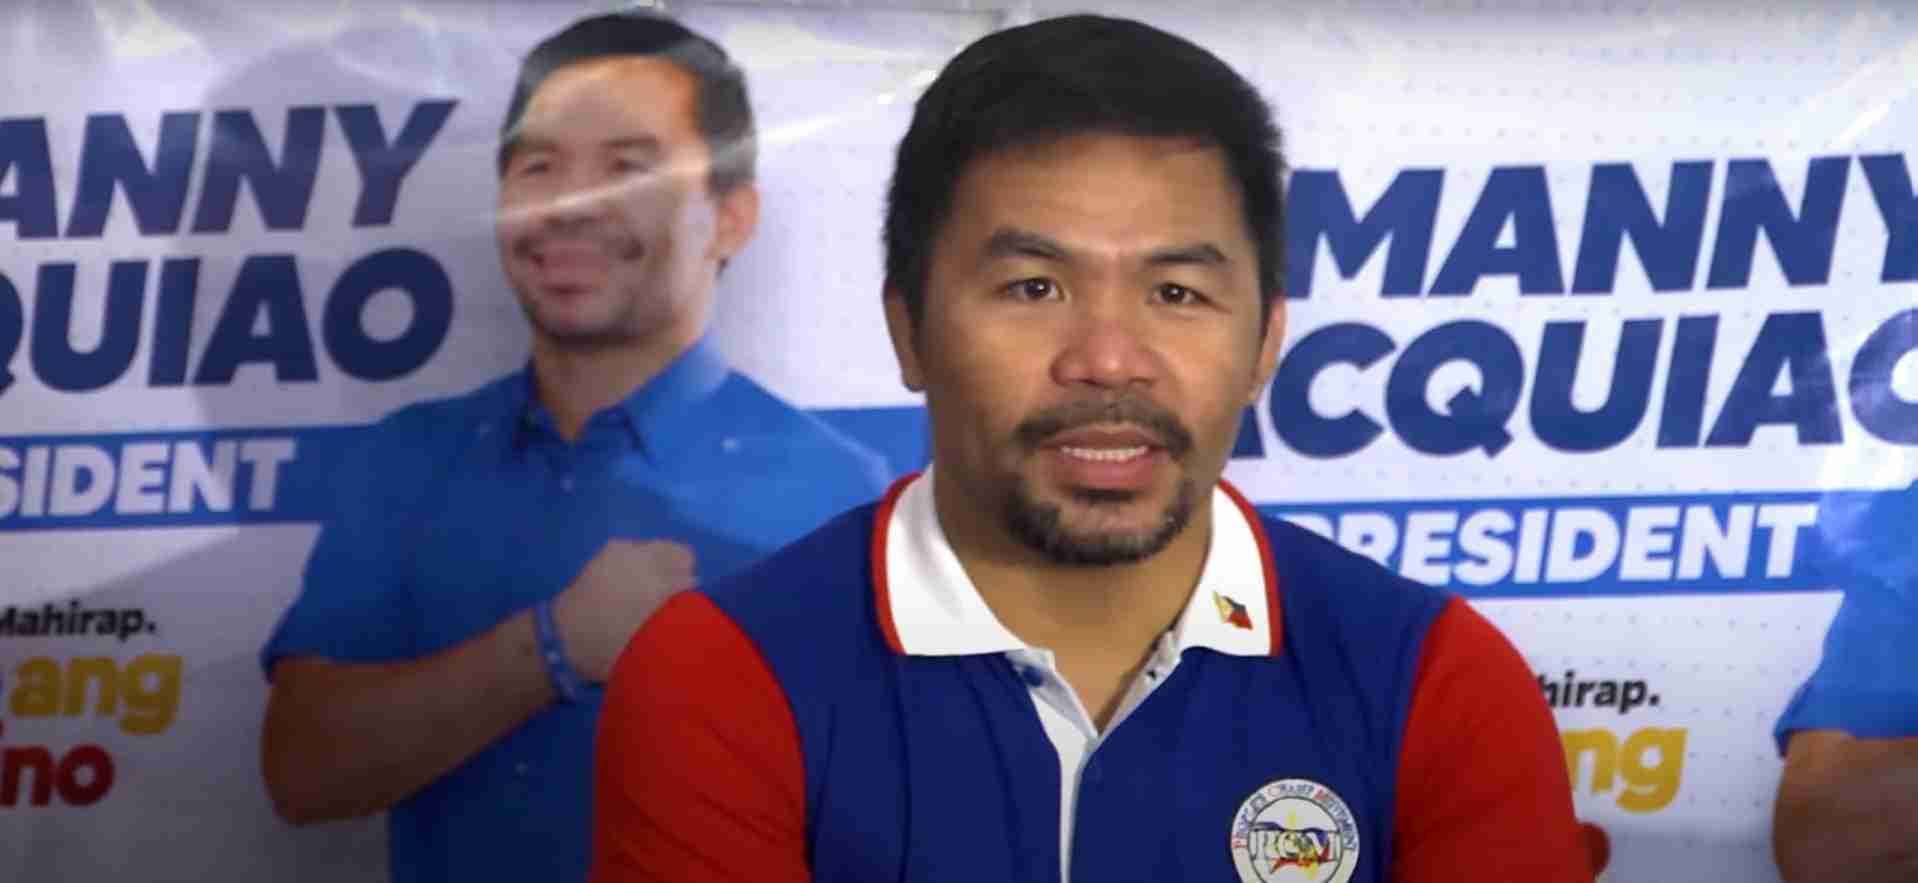 Pacquiao Goes From Strength To Strength On Route To Presidency